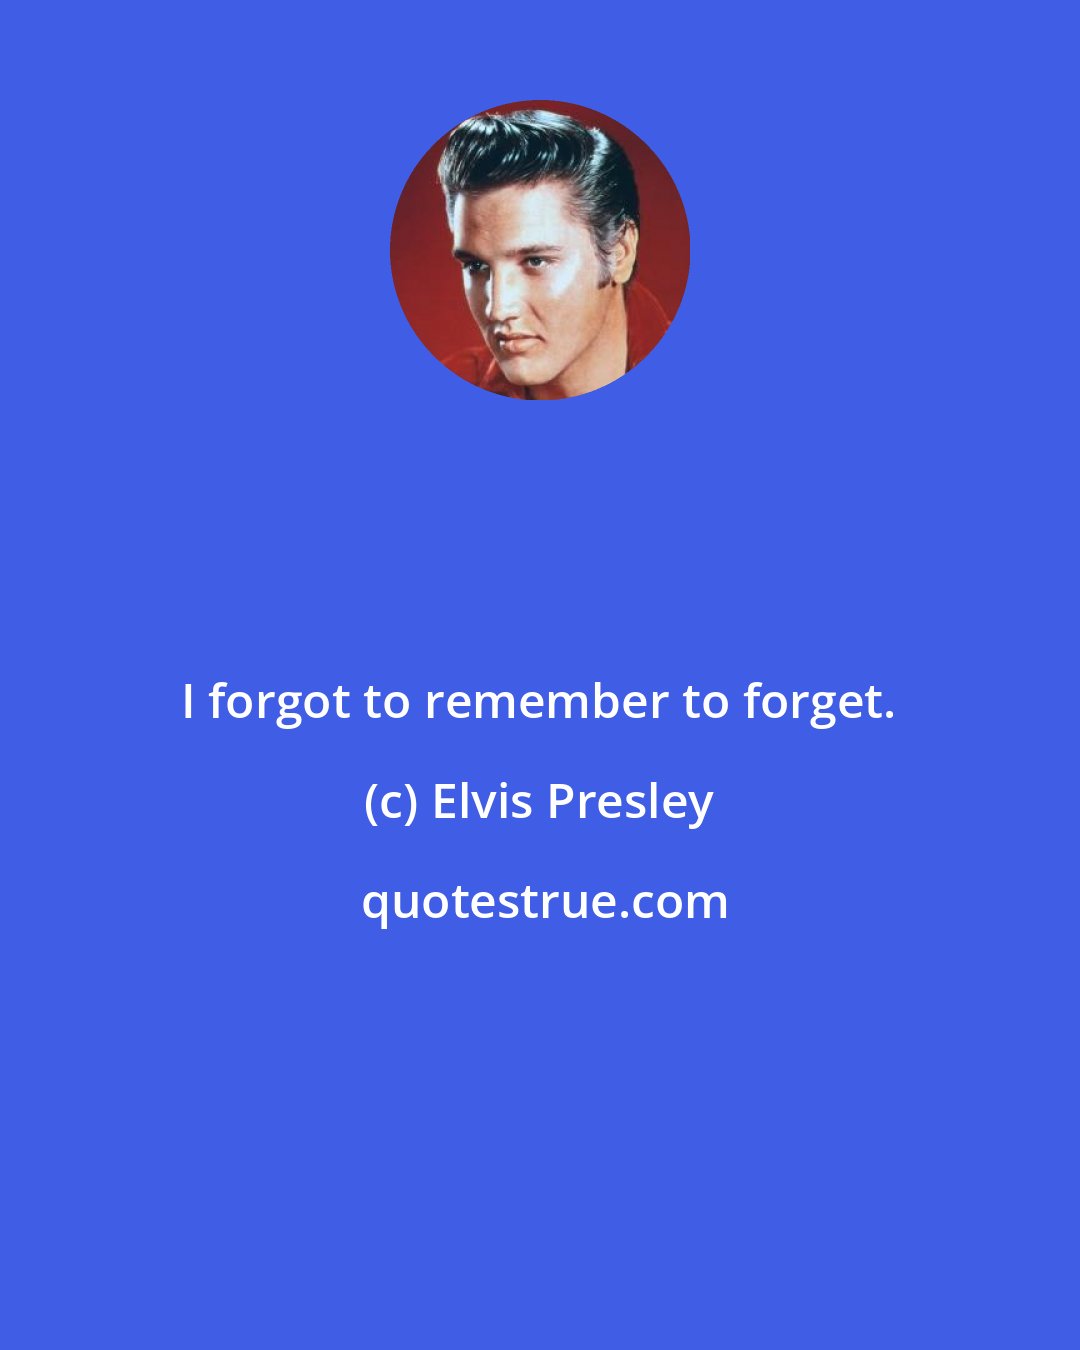 Elvis Presley: I forgot to remember to forget.